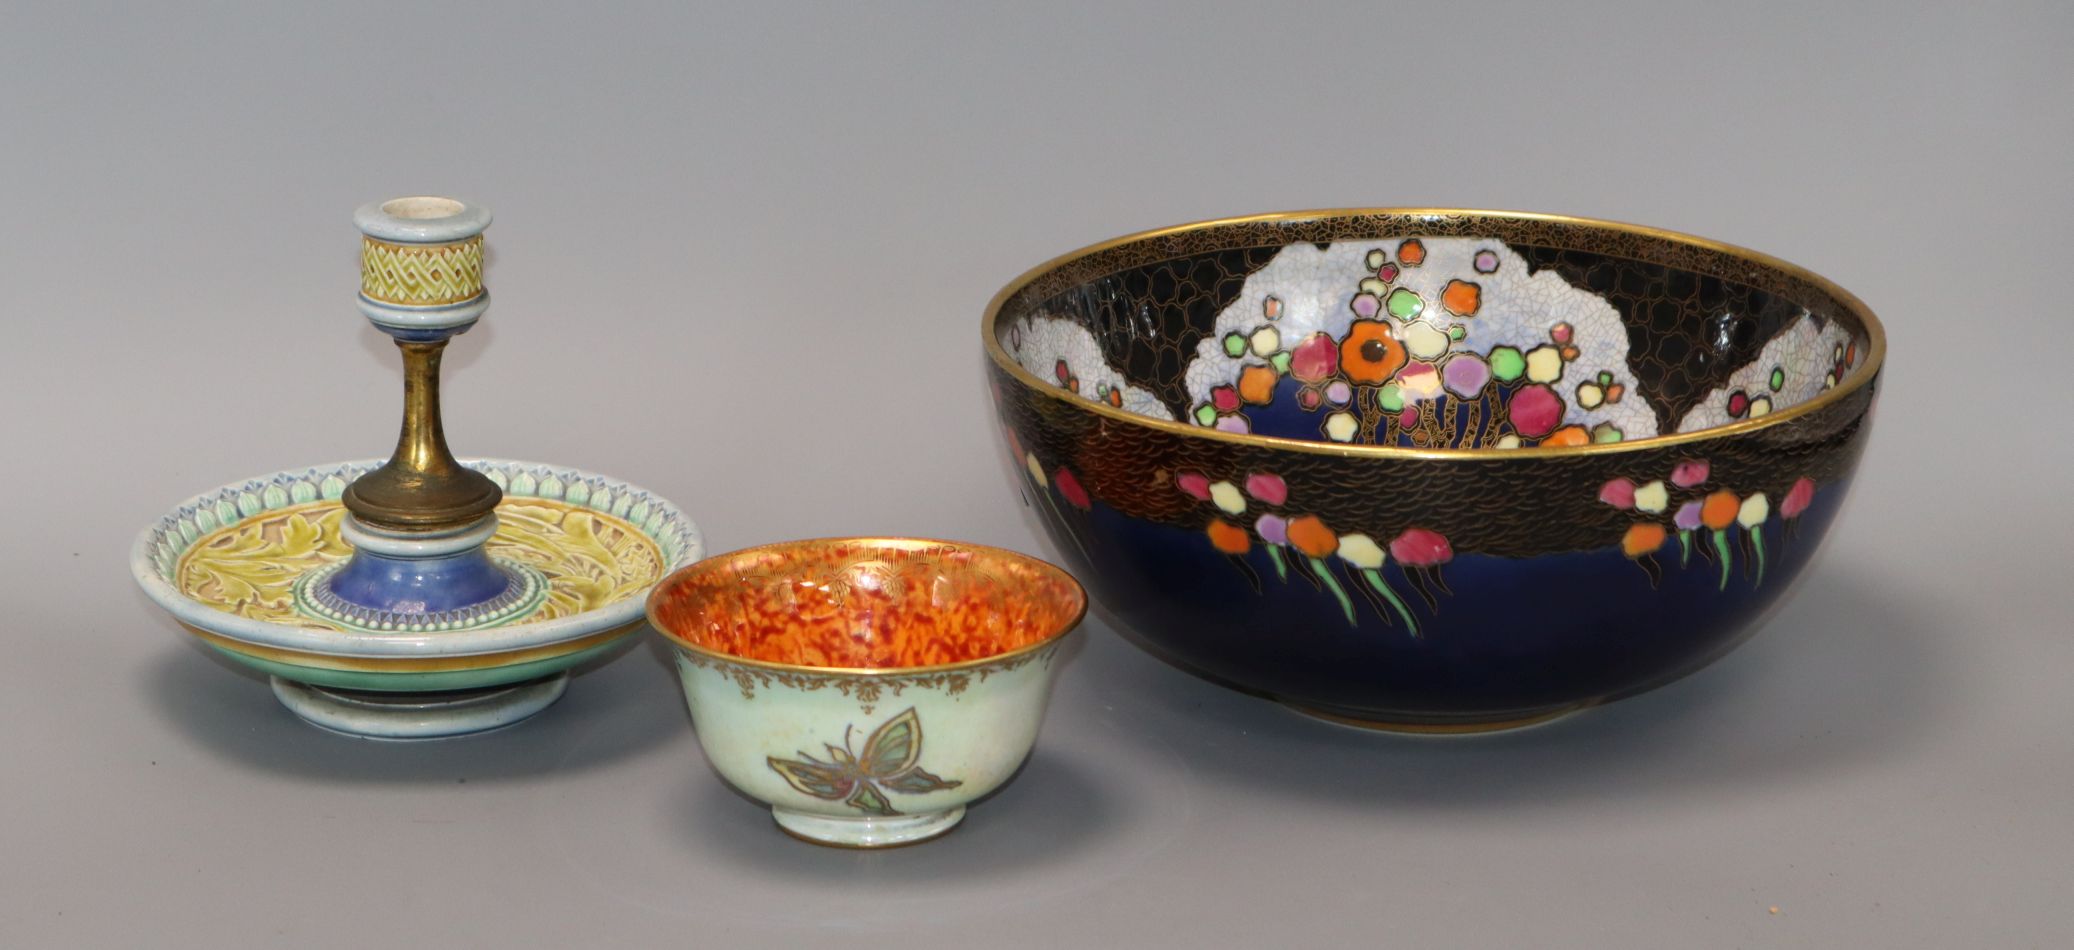 A Doulton Lambeth chamberstick, a Wedgwood butterfly lustre bowl and a Crown Devon bowl